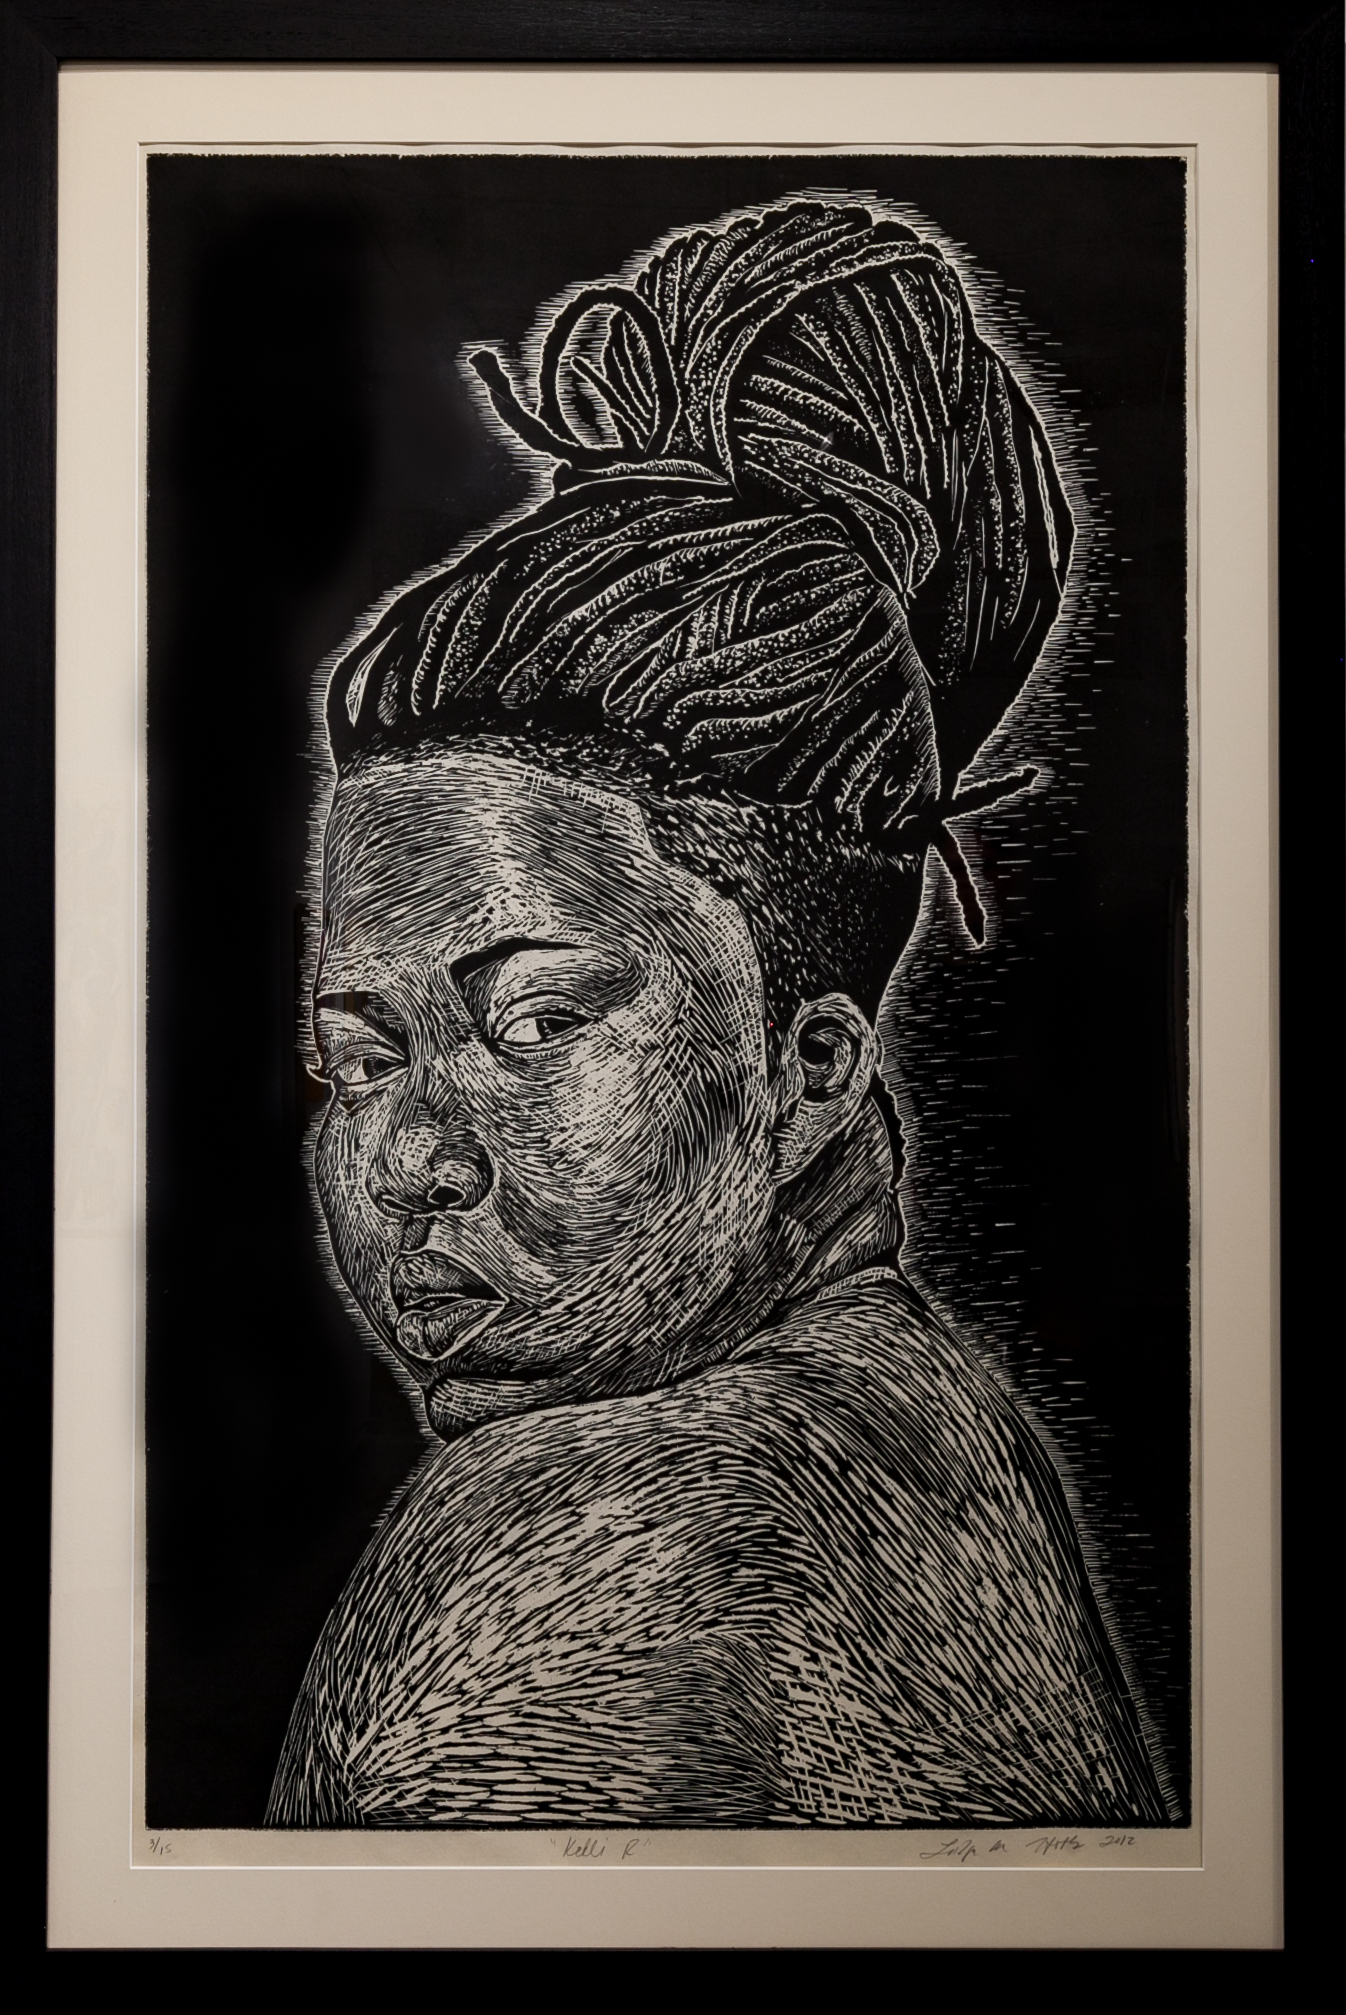  LaToya M. Hobbs   Kelli R. , 2012  Medium: Woodcut on paper  Dimensions: 50x34 inches  “ Kelli R.  is from my ‘Beautiful Uprising Series’, which investigates the intersection of race, beauty, and identity among women of the African Diaspora in an at